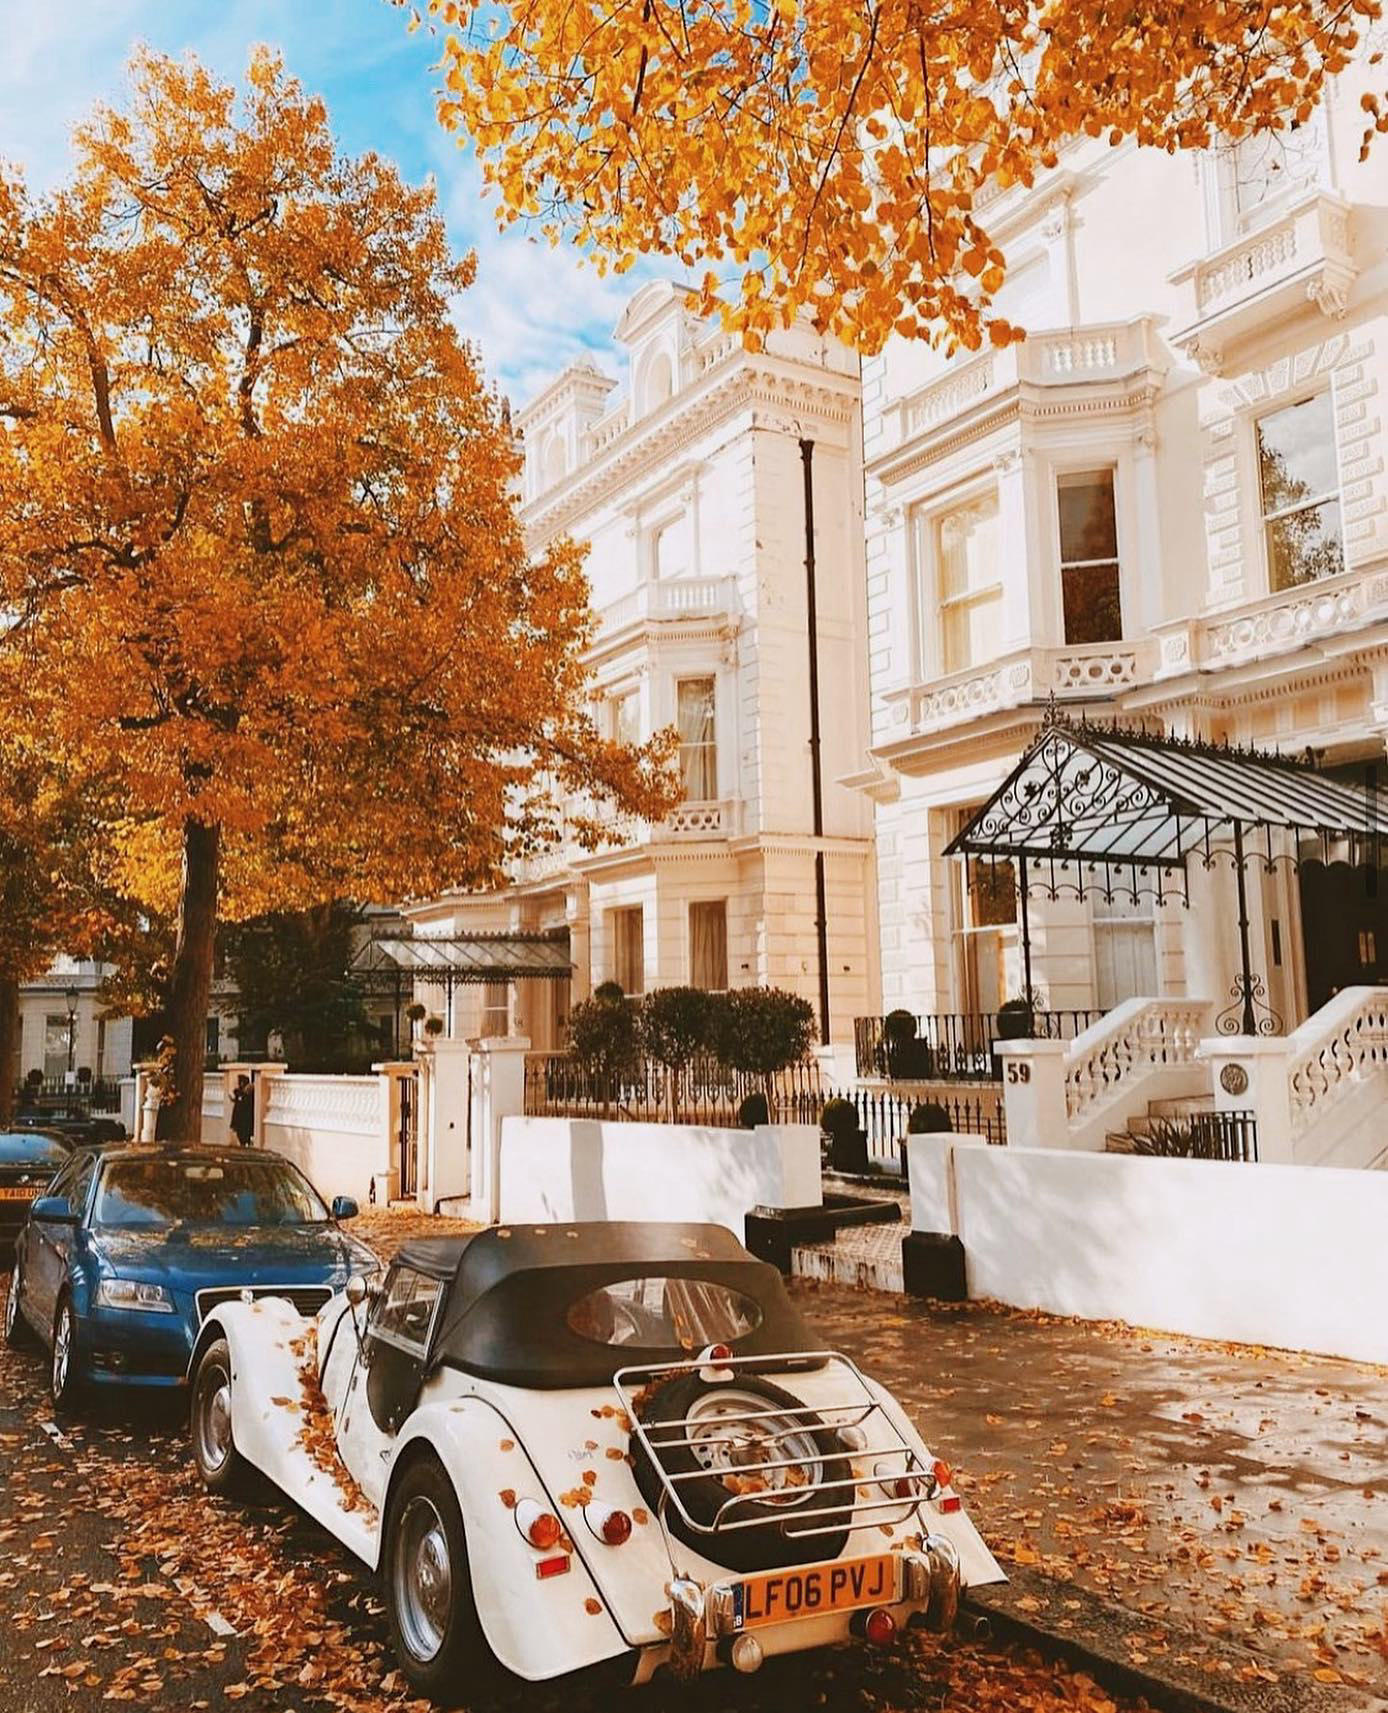 Royal Lancaster London - Luxury Hotel - Autumn is such a beautiful time to explore the city